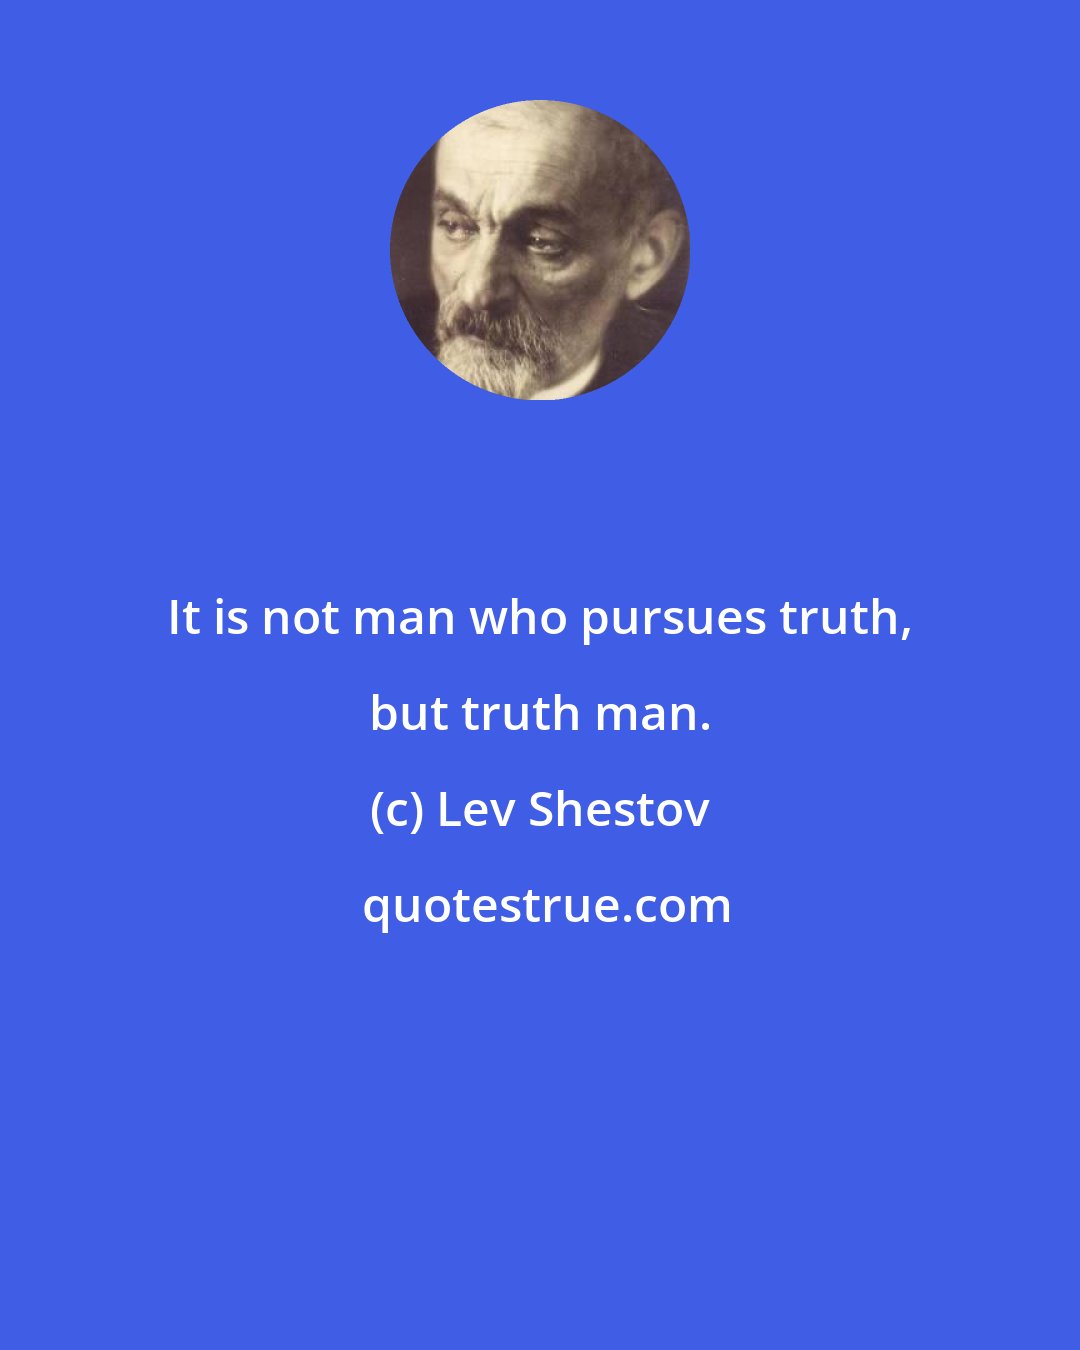 Lev Shestov: It is not man who pursues truth, but truth man.